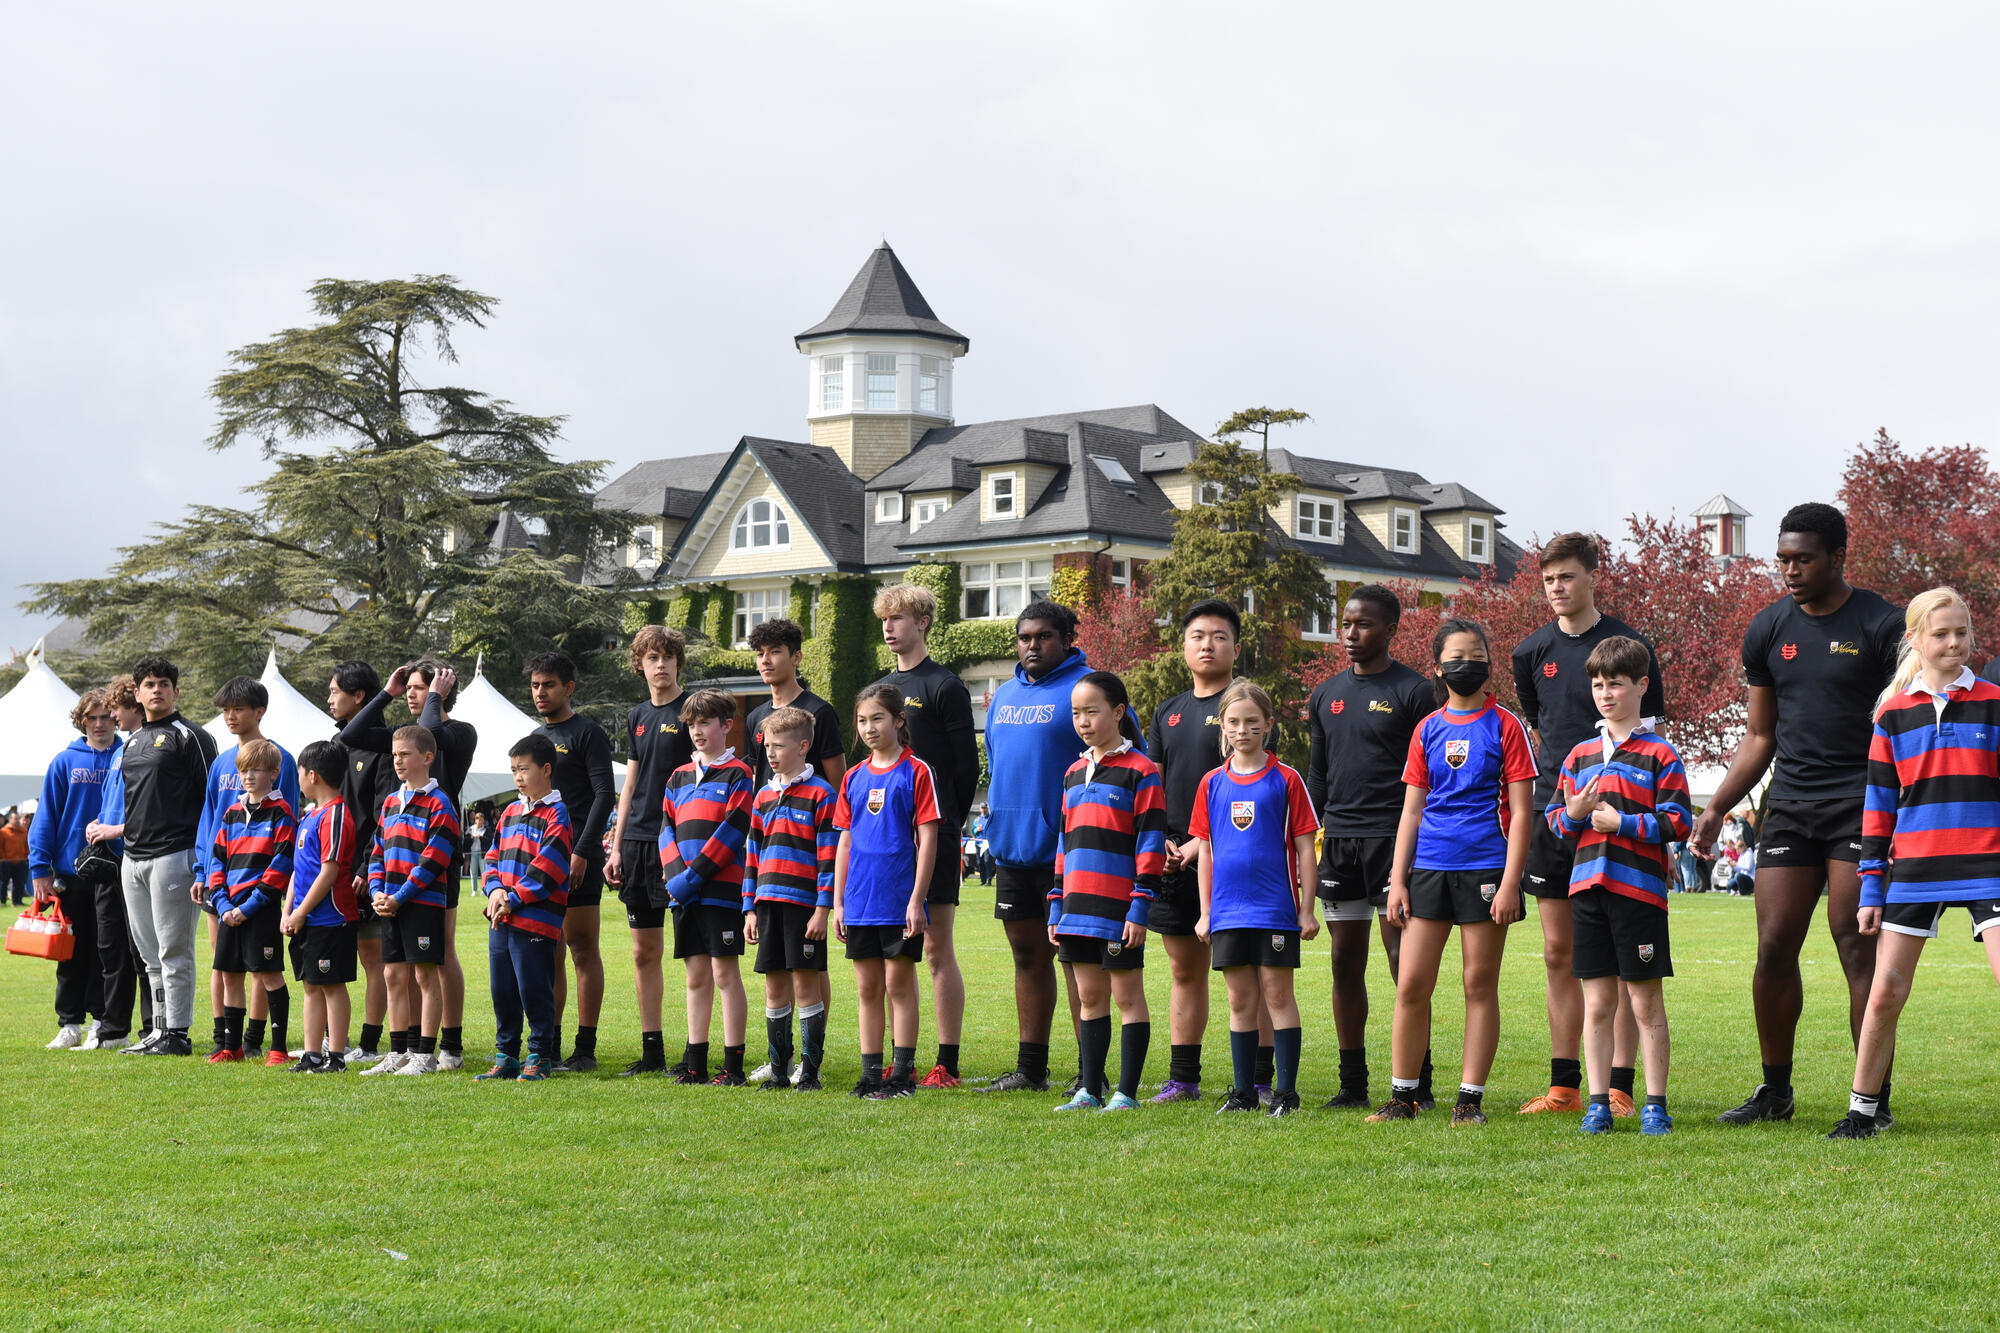 Junior School student rugby players stand alongside Senior School rugby players during Alumni Weekend